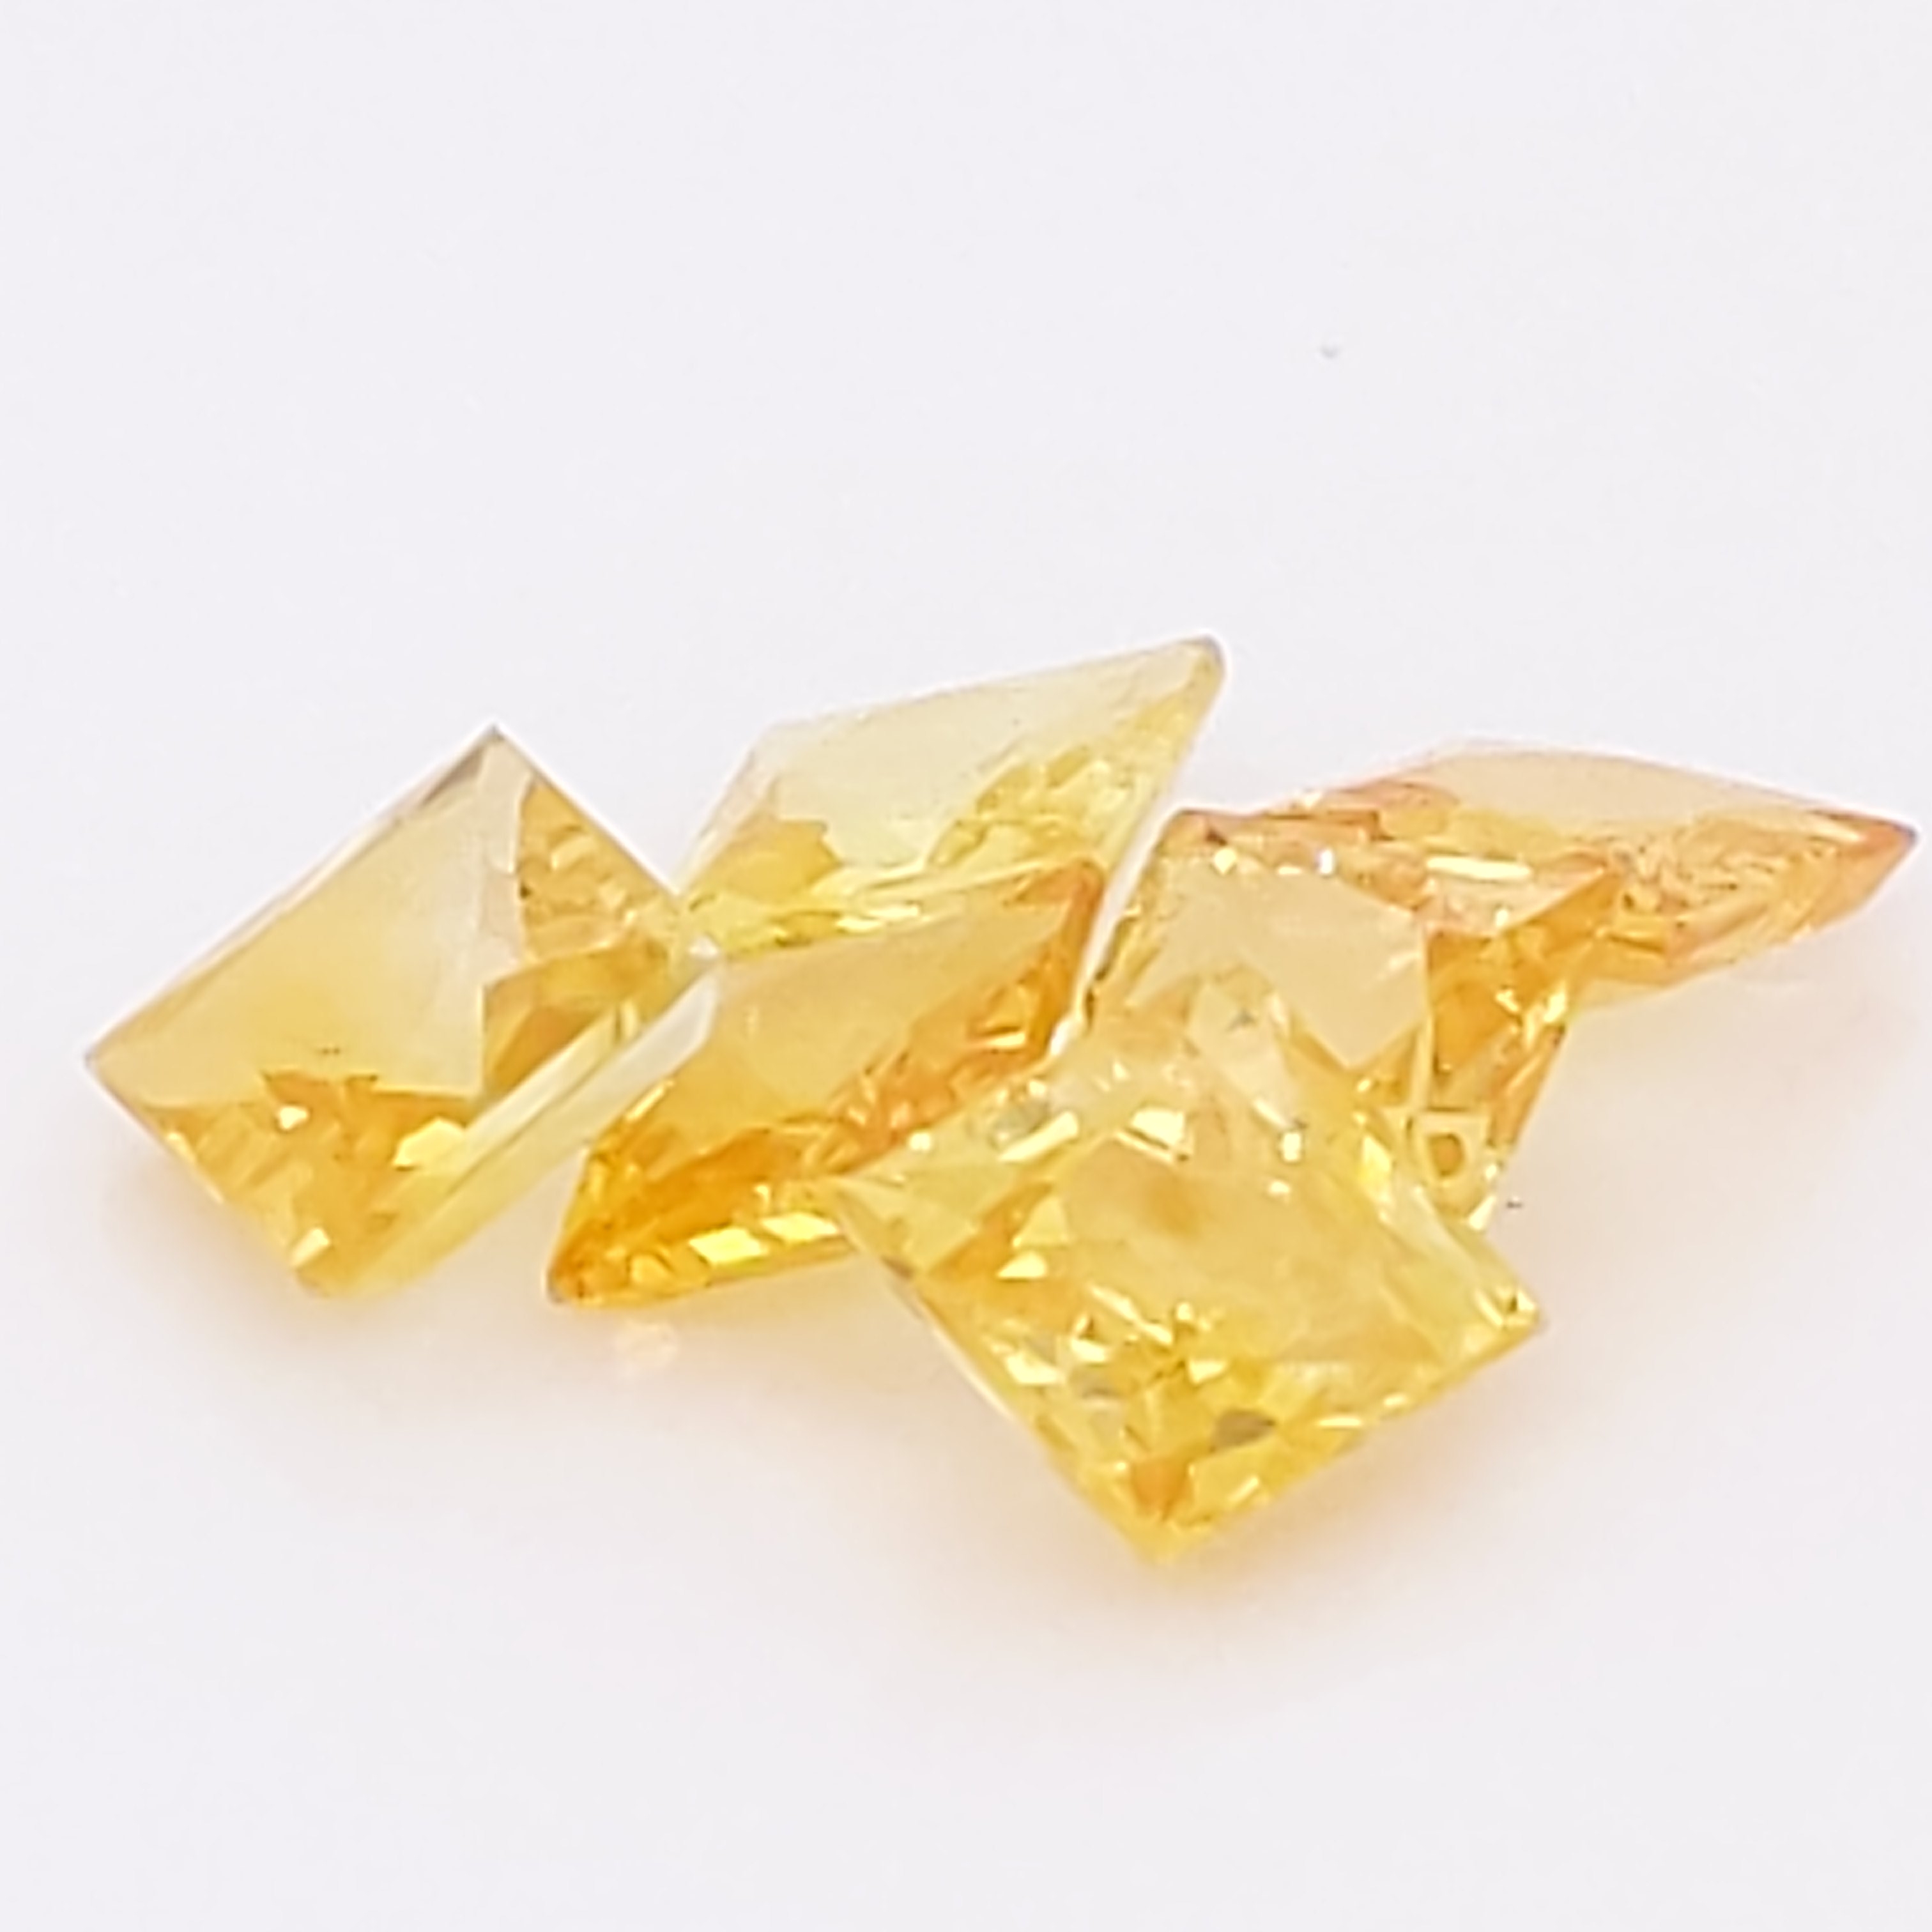 Square Yellow Sapphires 6 stones ~4mm each 1.99 Carats Total - Simply ...